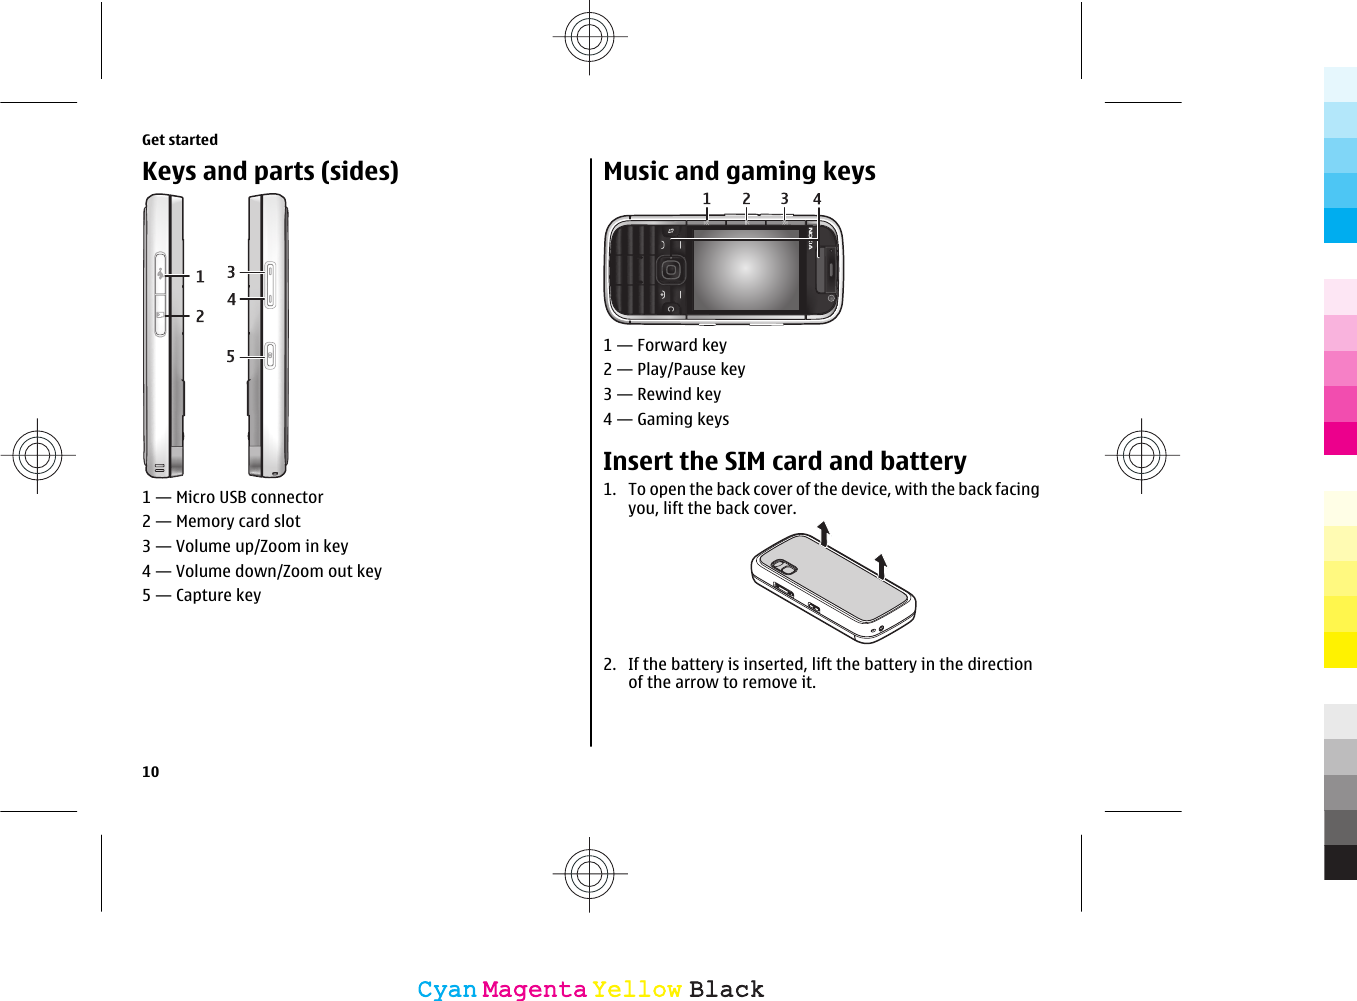 Keys and parts (sides)1 — Micro USB connector2 — Memory card slot3 — Volume up/Zoom in key4 — Volume down/Zoom out key5 — Capture keyMusic and gaming keys1 — Forward key2 — Play/Pause key3 — Rewind key4 — Gaming keysInsert the SIM card and battery1. To open the back cover of the device, with the back facingyou, lift the back cover.2. If the battery is inserted, lift the battery in the directionof the arrow to remove it.Get started10CyanCyanMagentaMagentaYellowYellowBlackBlack